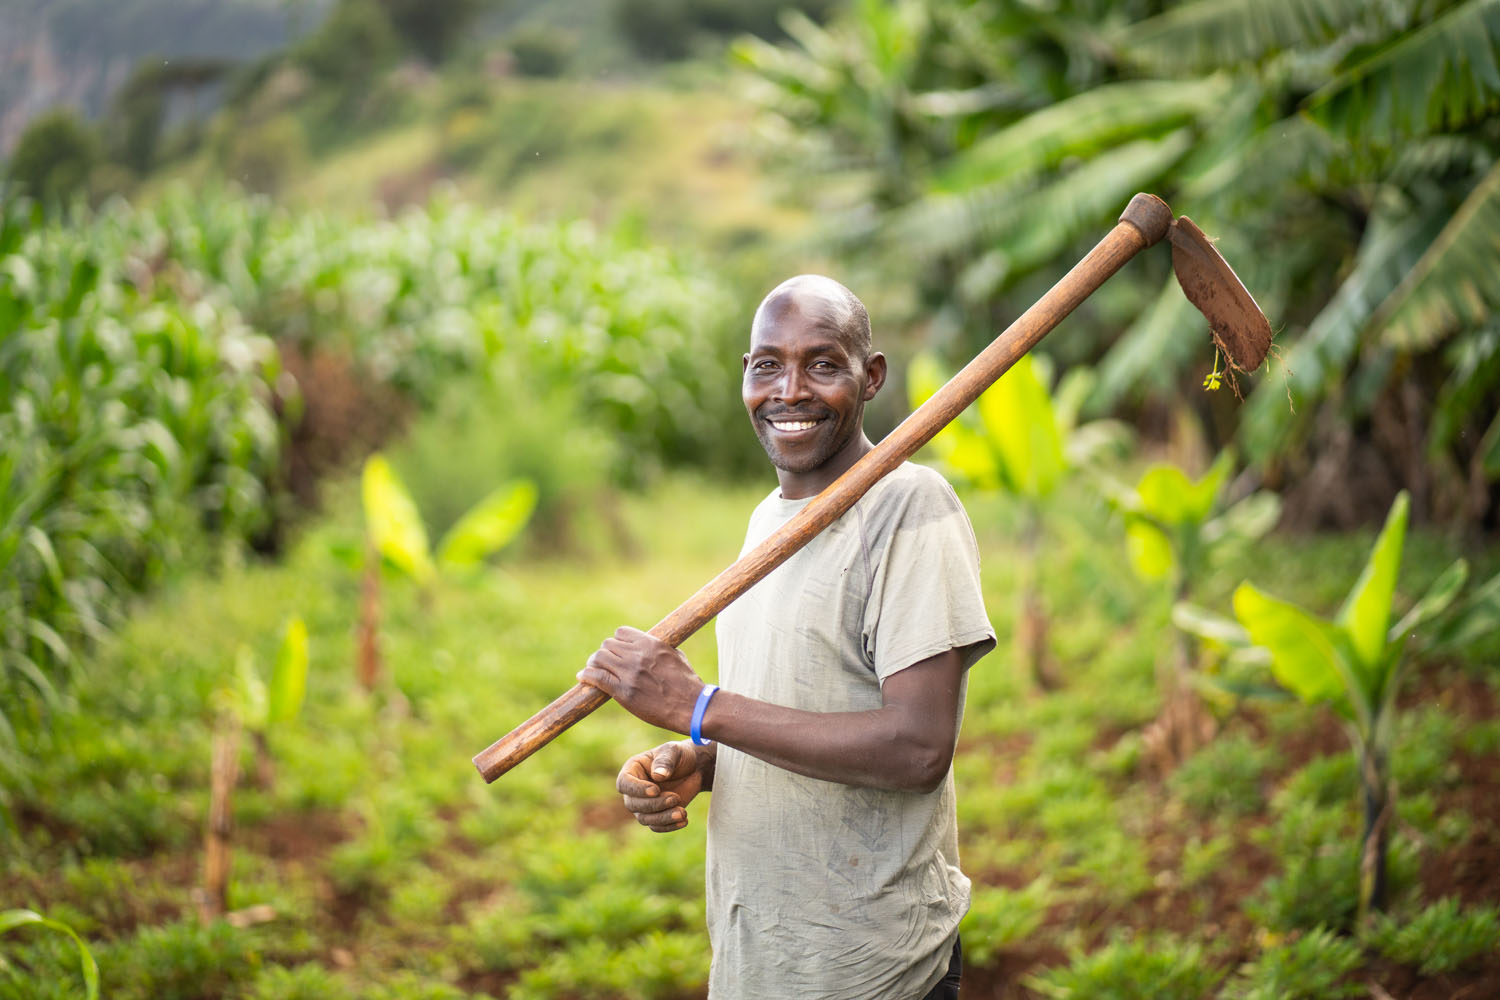 A Kenyan man carries a gardening hoe over his shoulder in his field, smiling at the camera. 